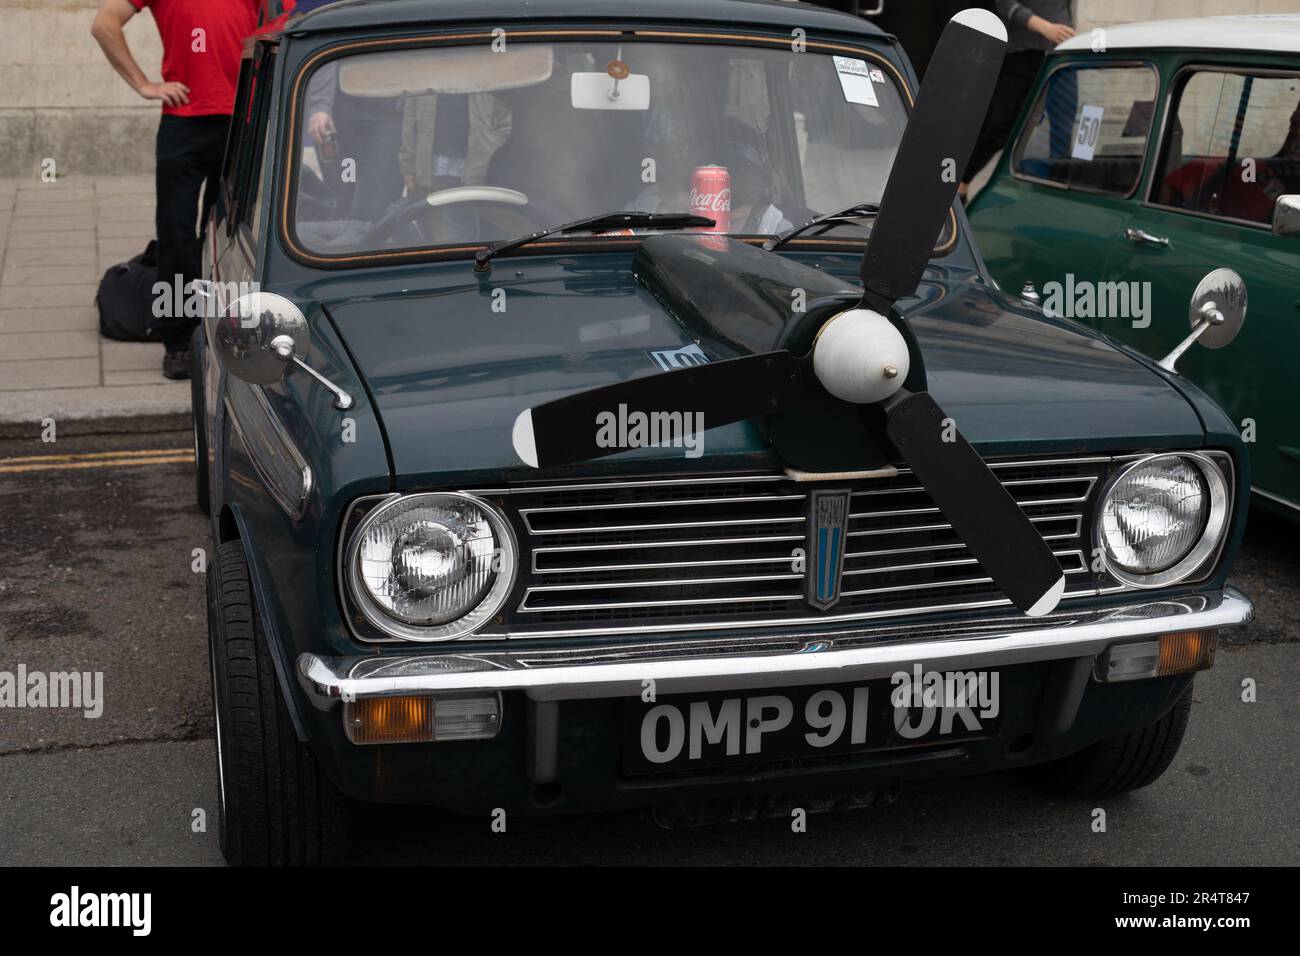 Brighton, UK - May 19 2019:  A black Mini car with a propeller over the engine is on show as part of the London Brighton Mini Run 2019 on the seafront Stock Photo